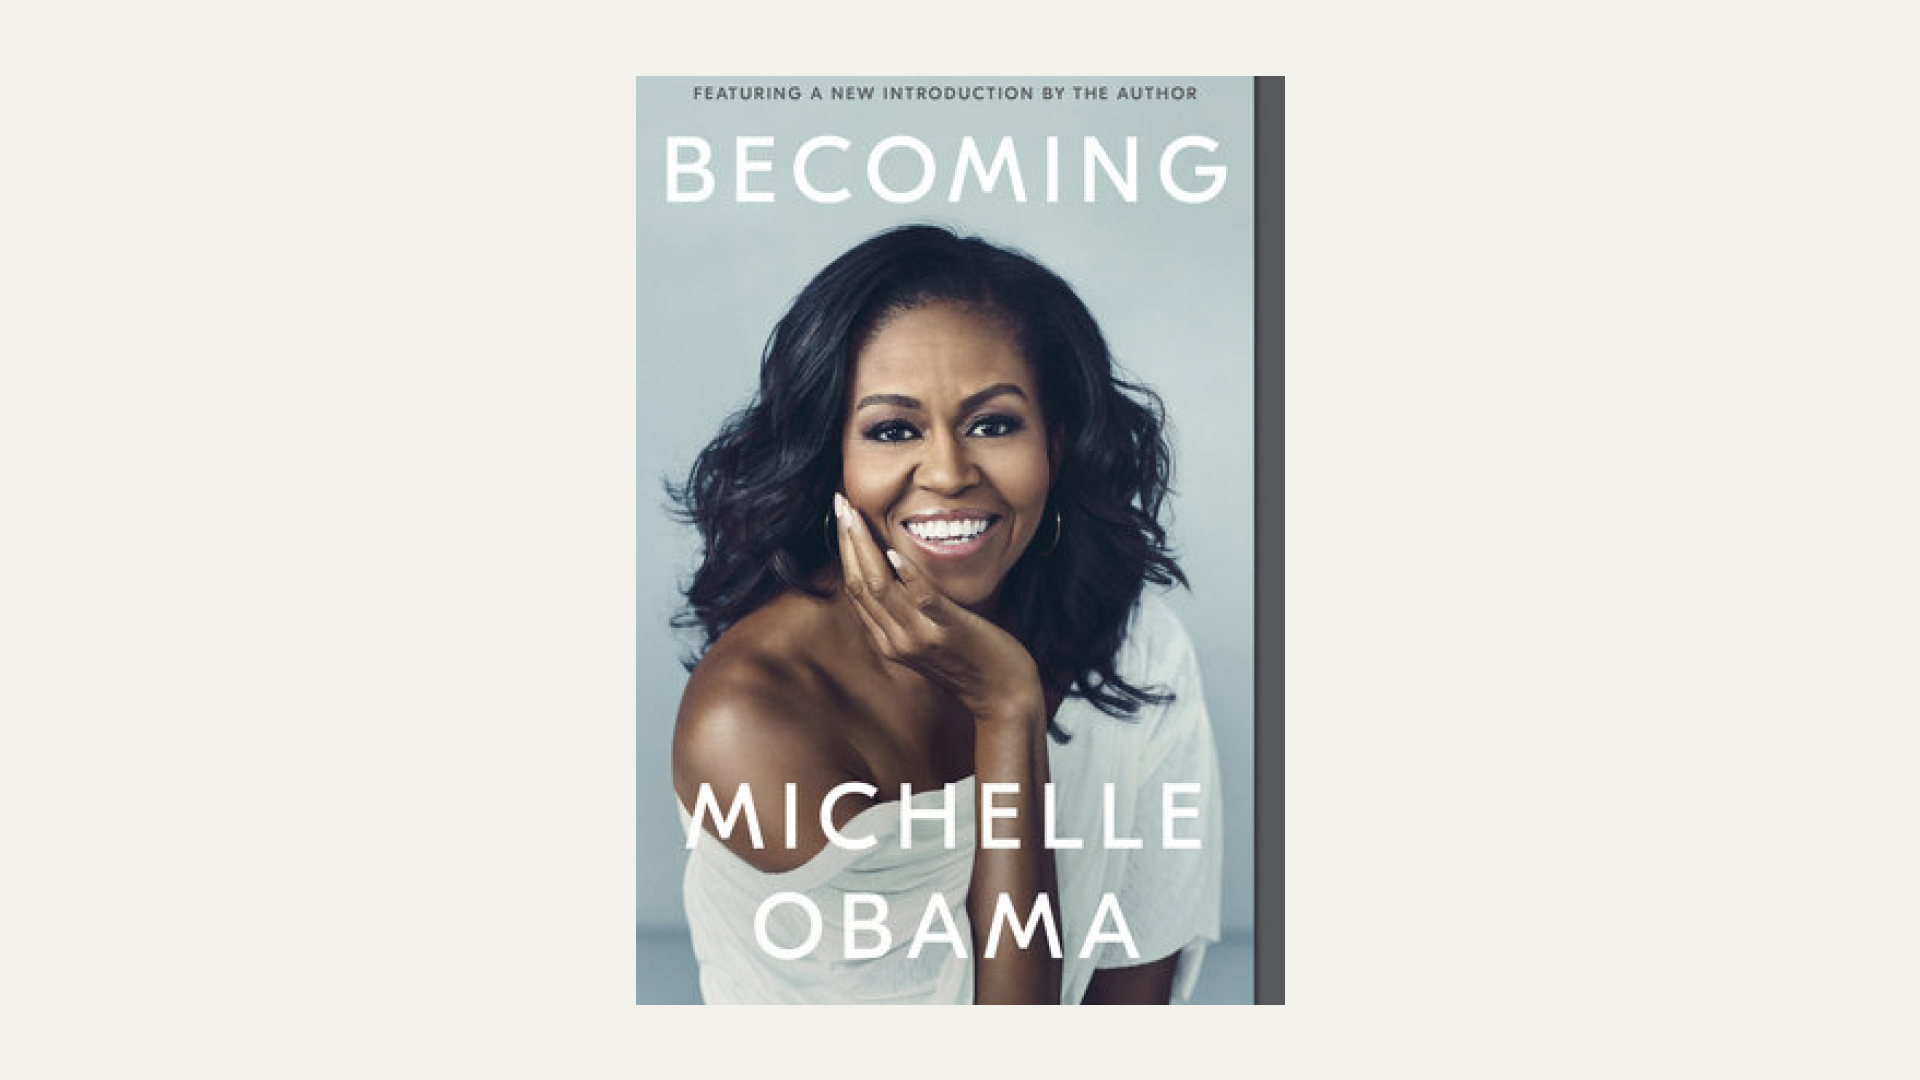 “Becoming” by Michelle Obama